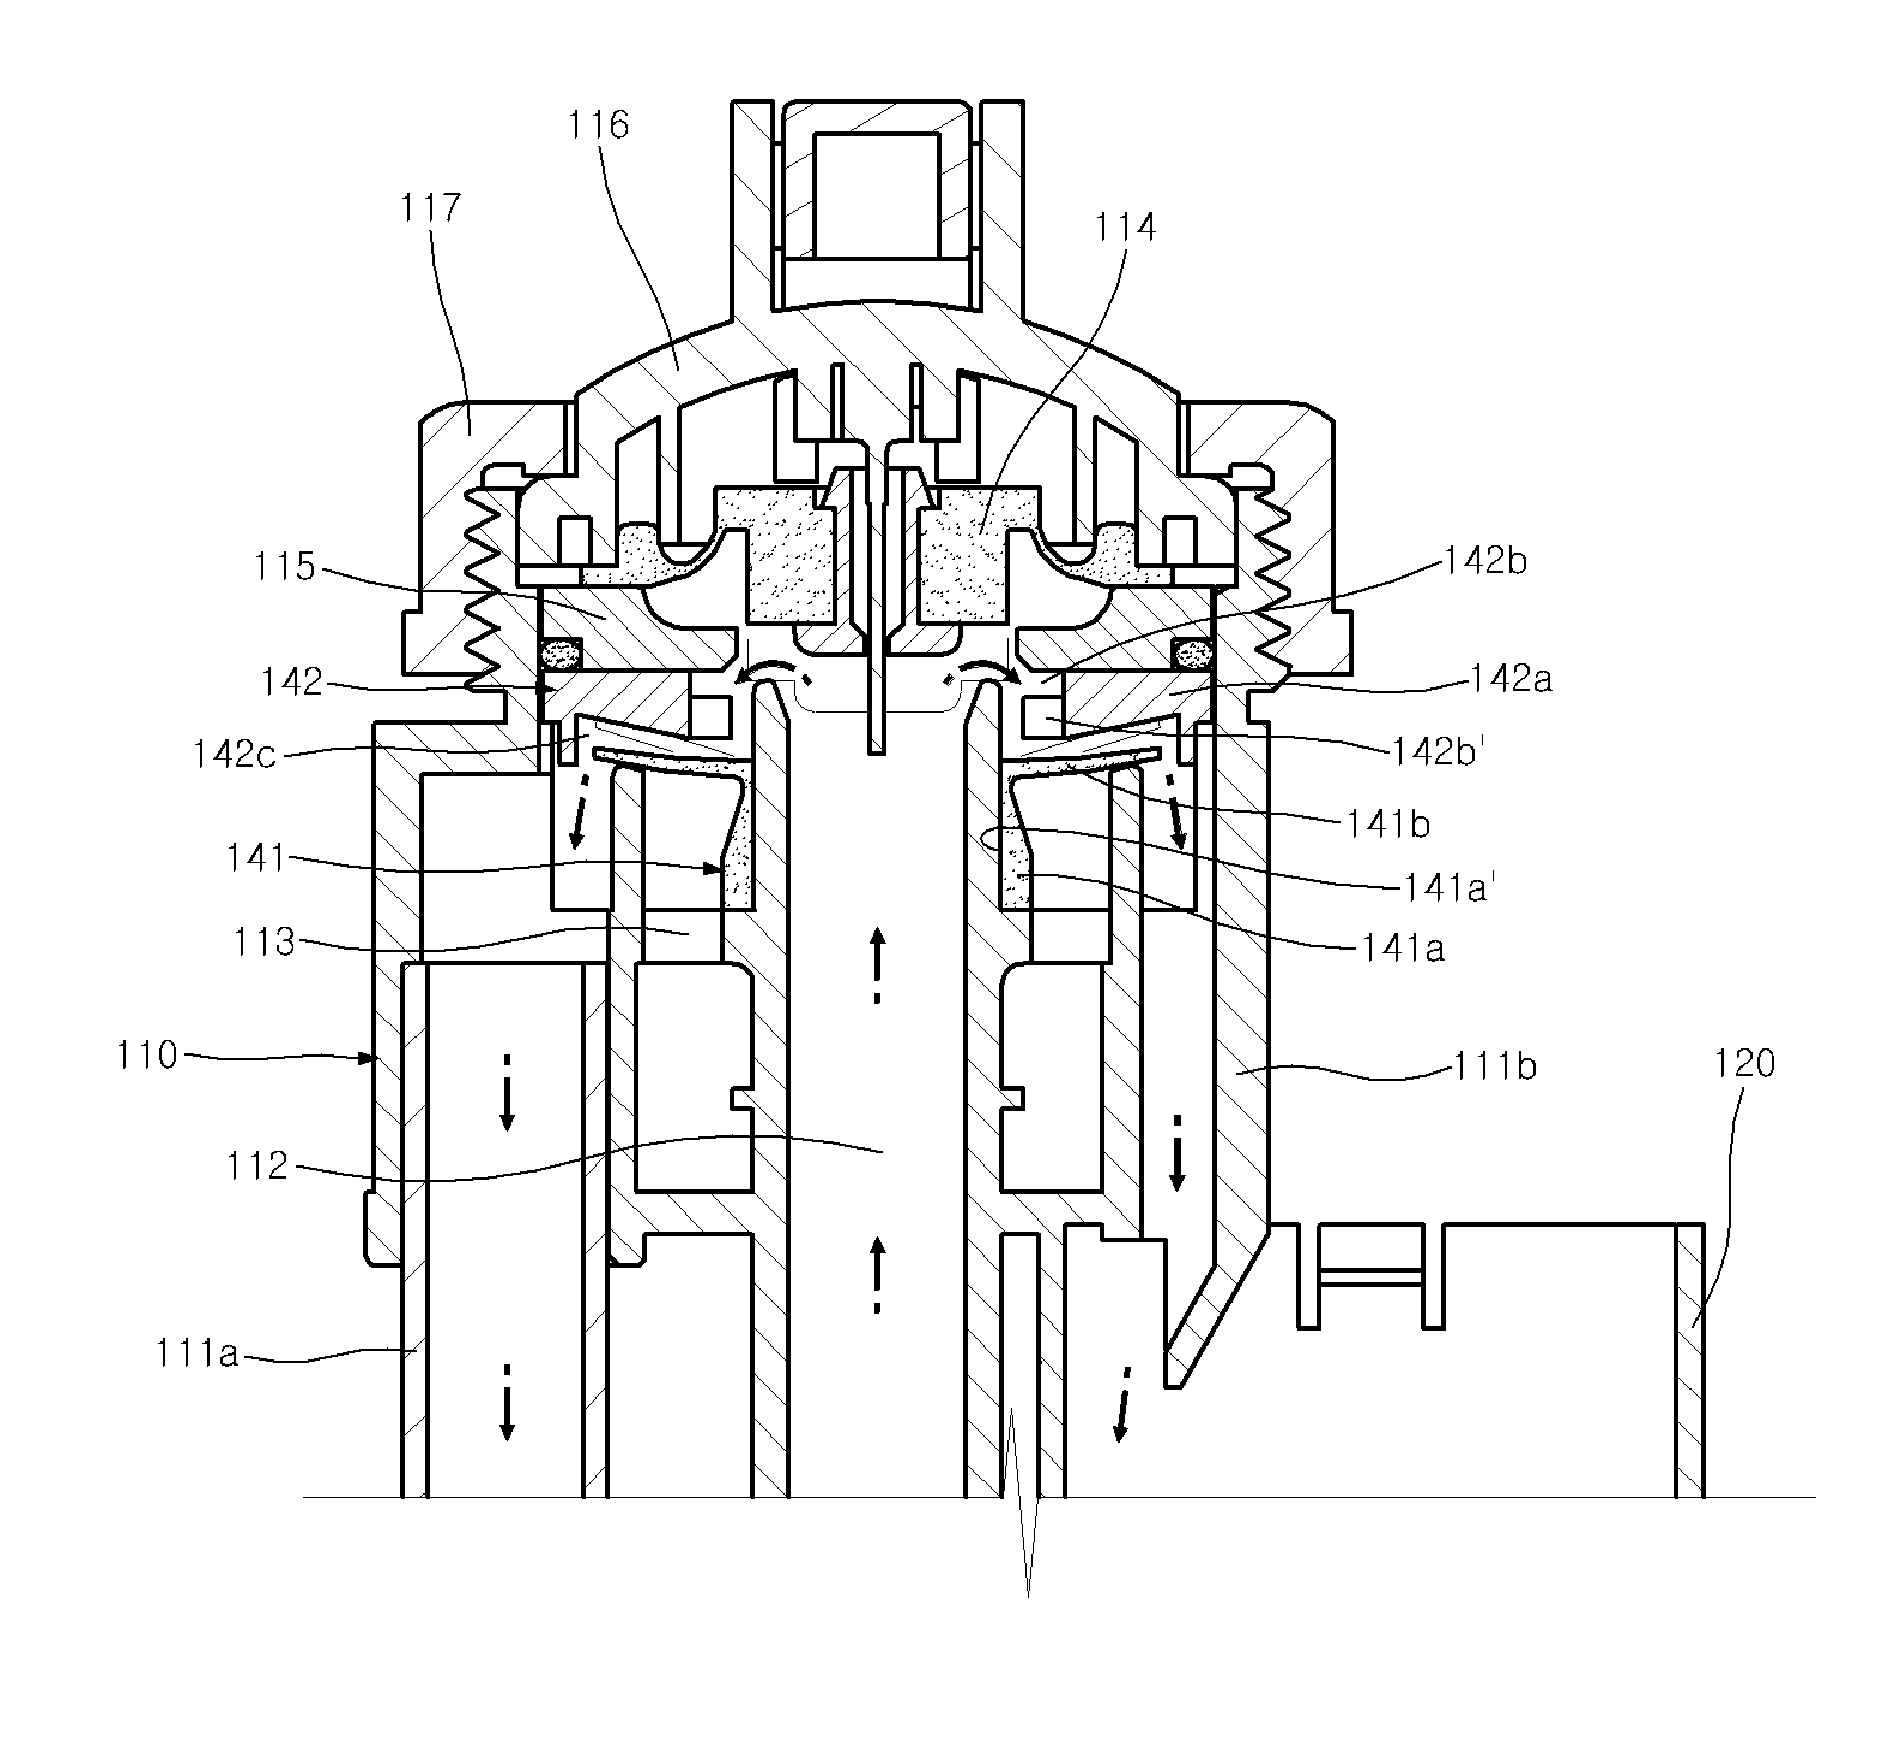 Apparatus for preventing backflow of fill valve in water toilet